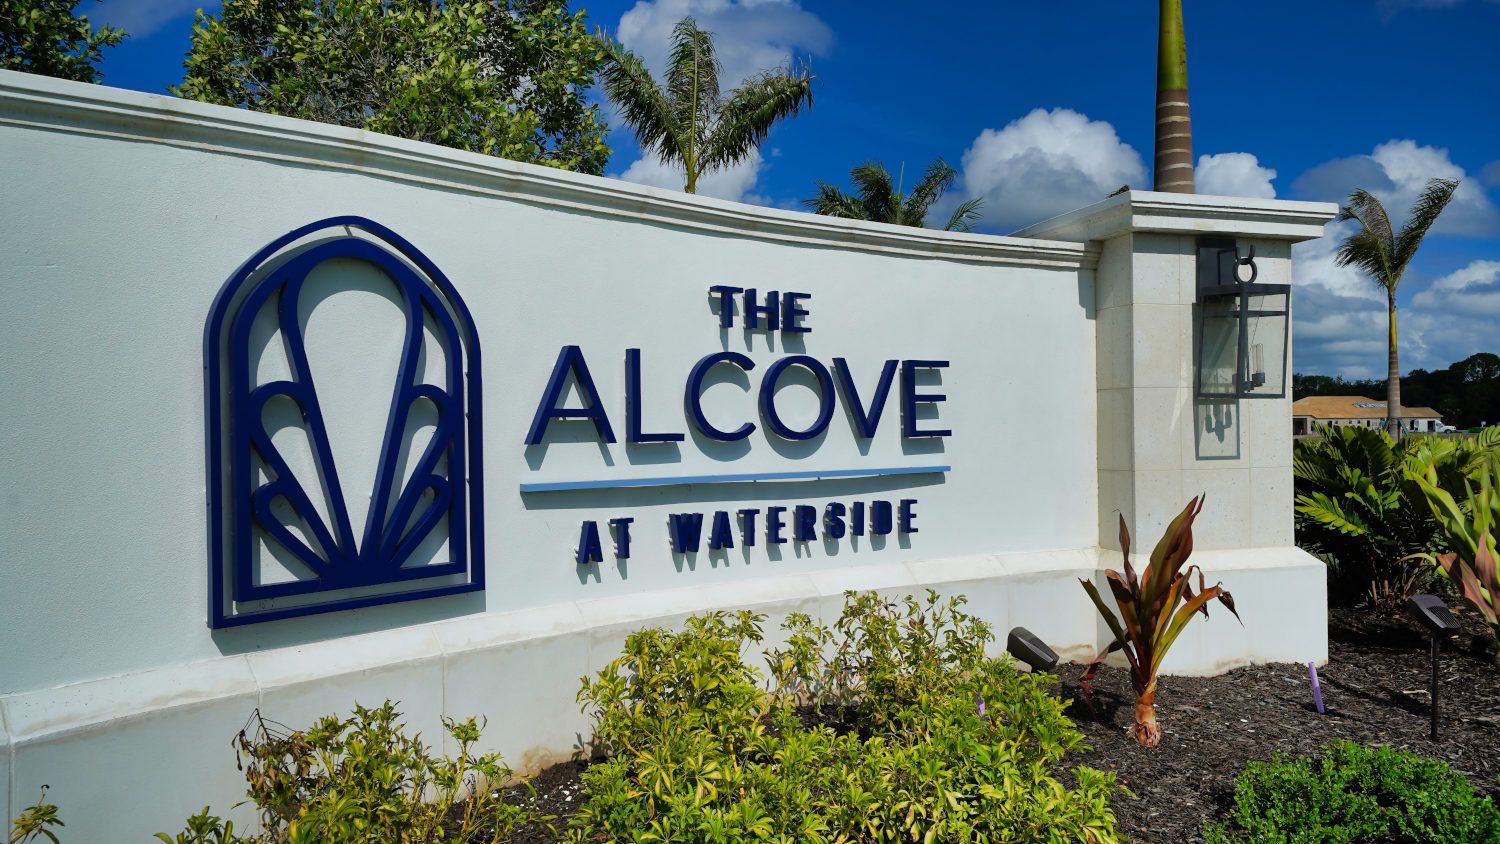 The Alcove at Waterside,34240